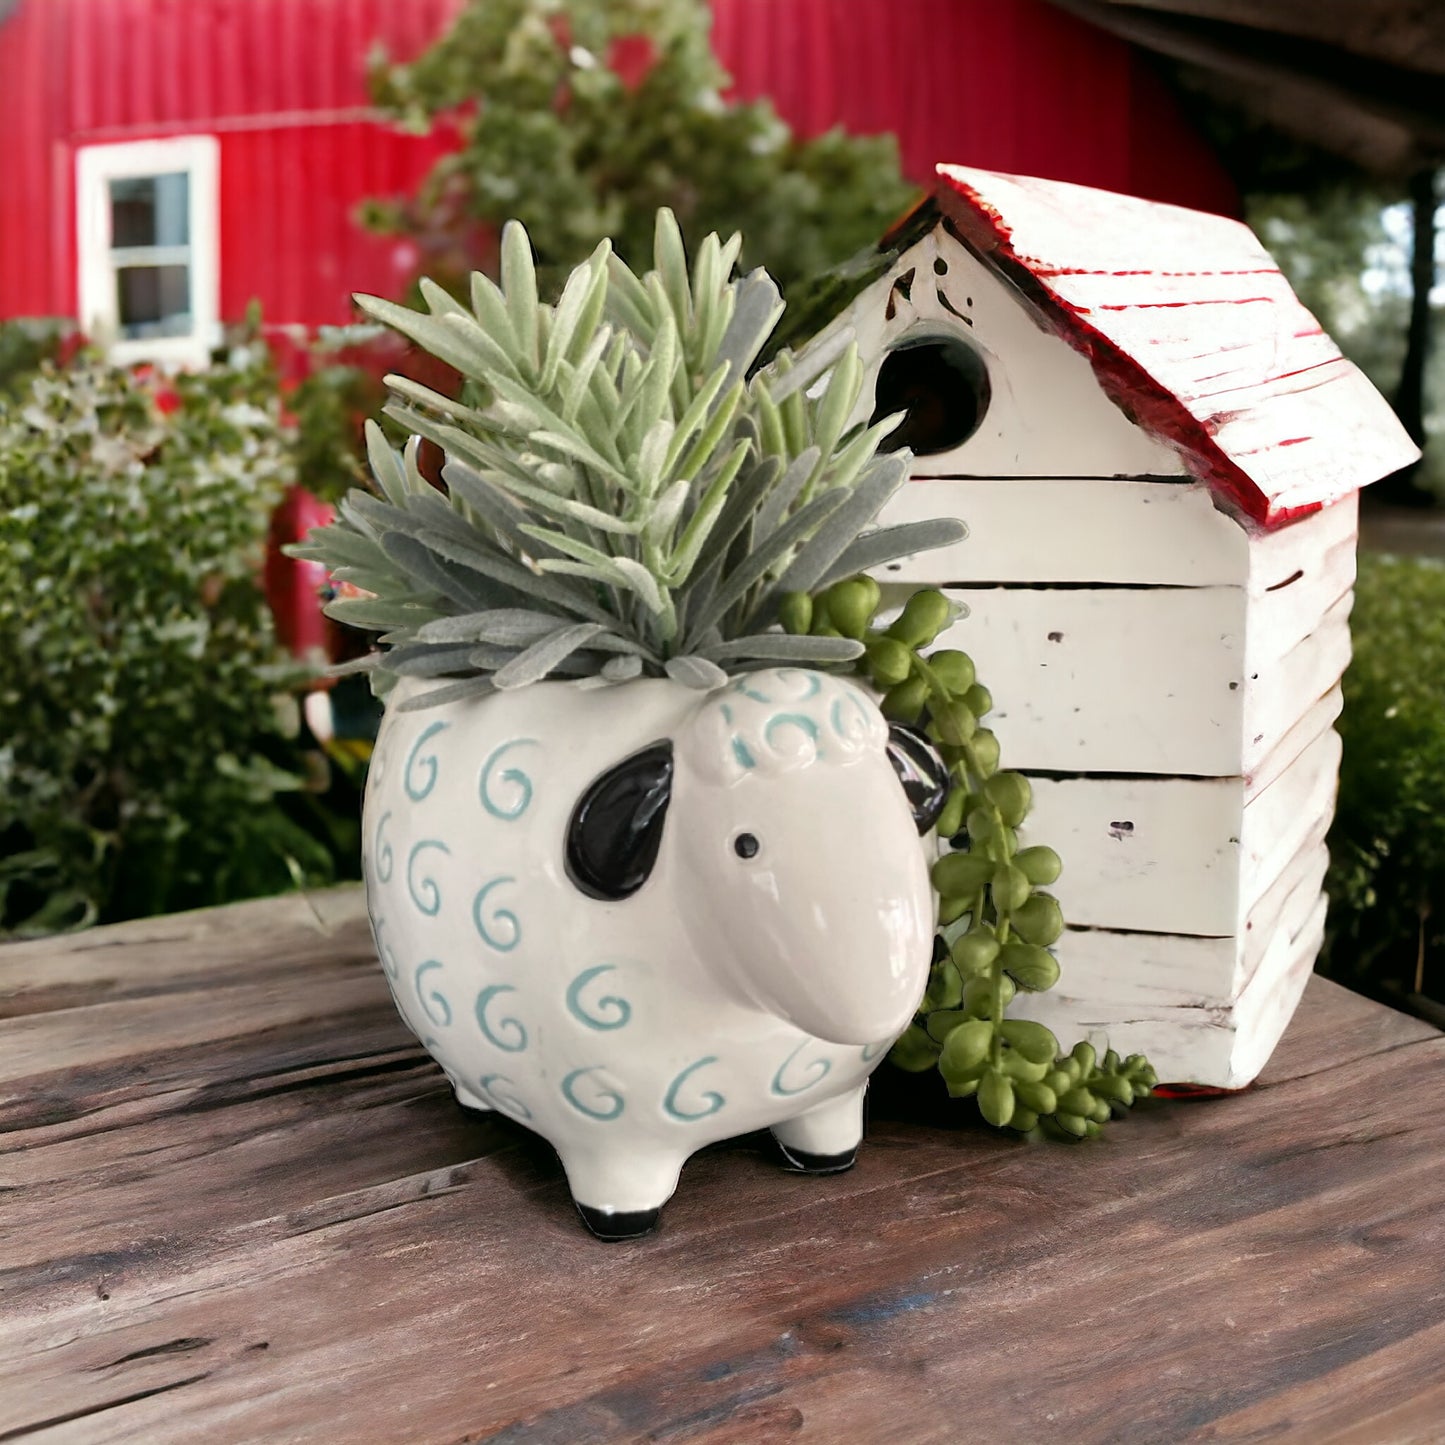 Sheep Pot Plant Garden - The Renmy Store Homewares & Gifts 